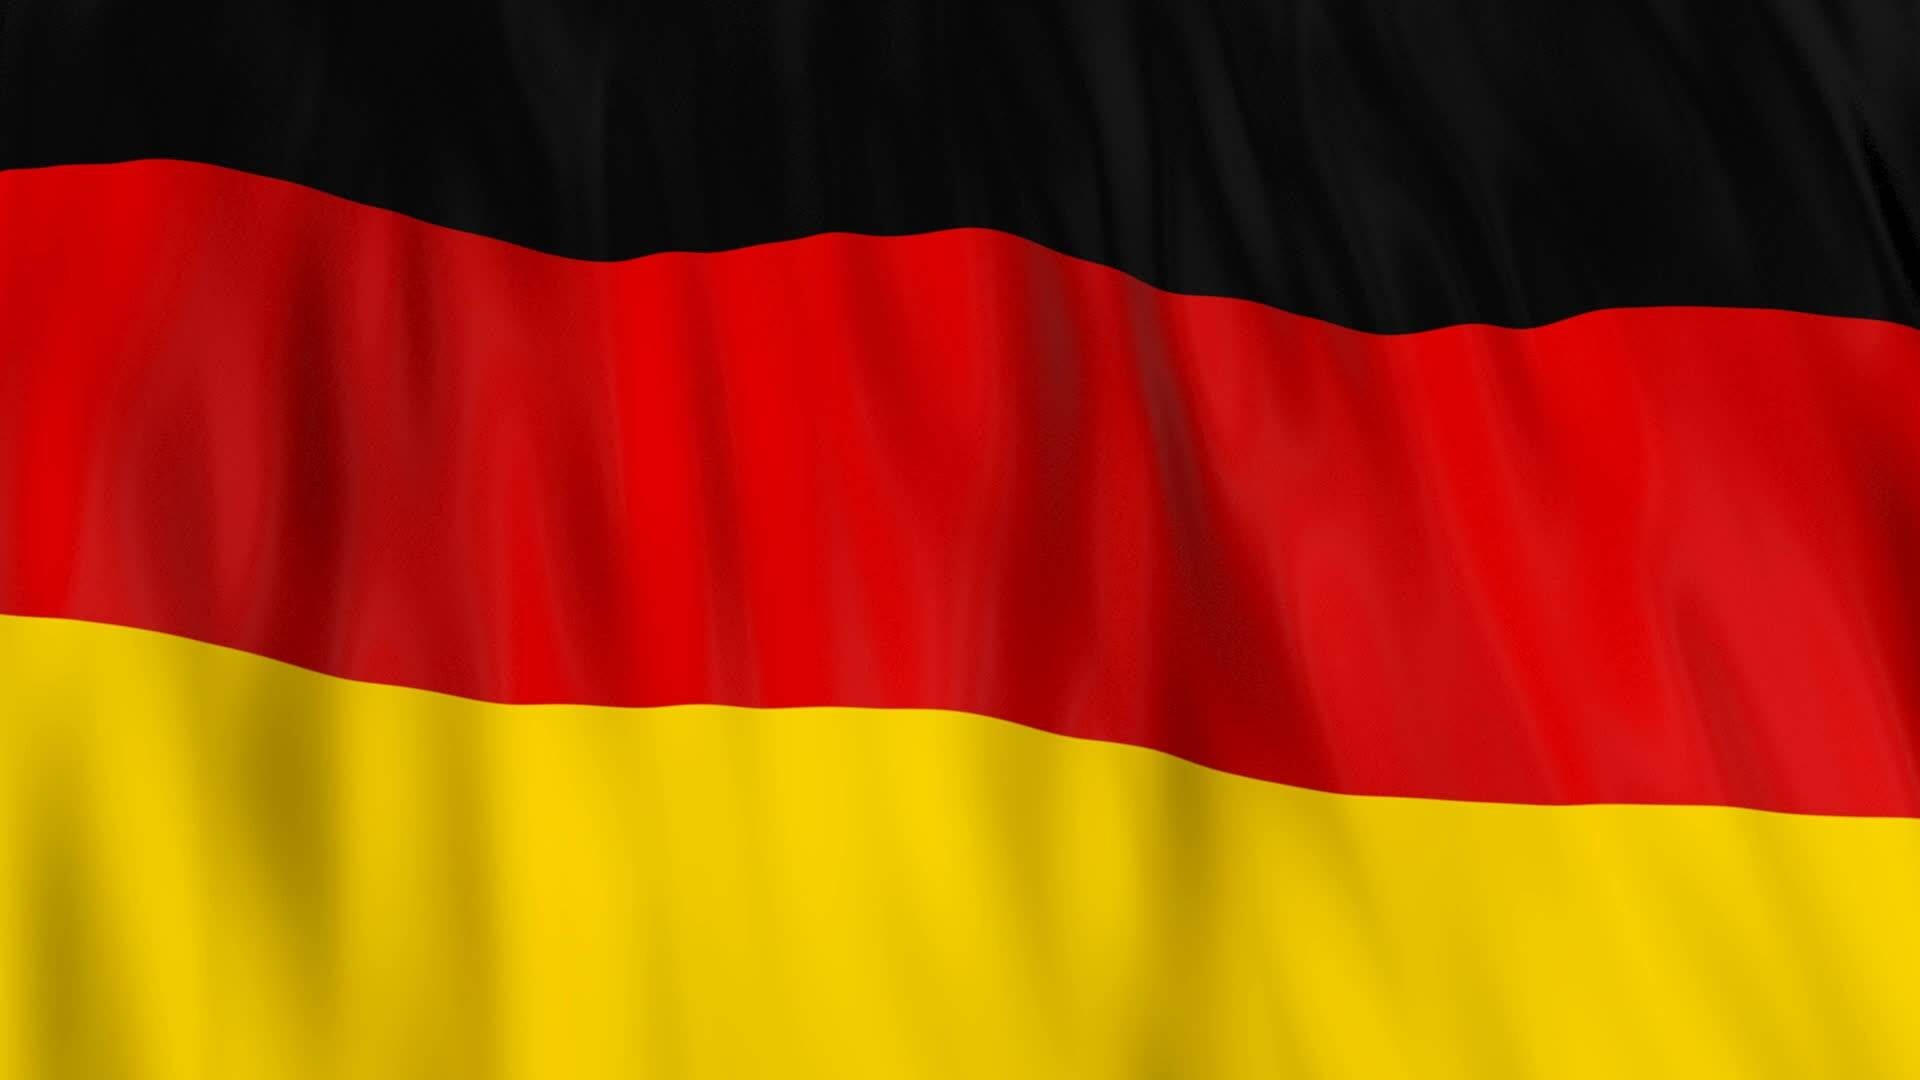 Flag of Germany: The second most populous country in Europe after Russia, The most populous member state of the European Union. 1920x1080 Full HD Background.